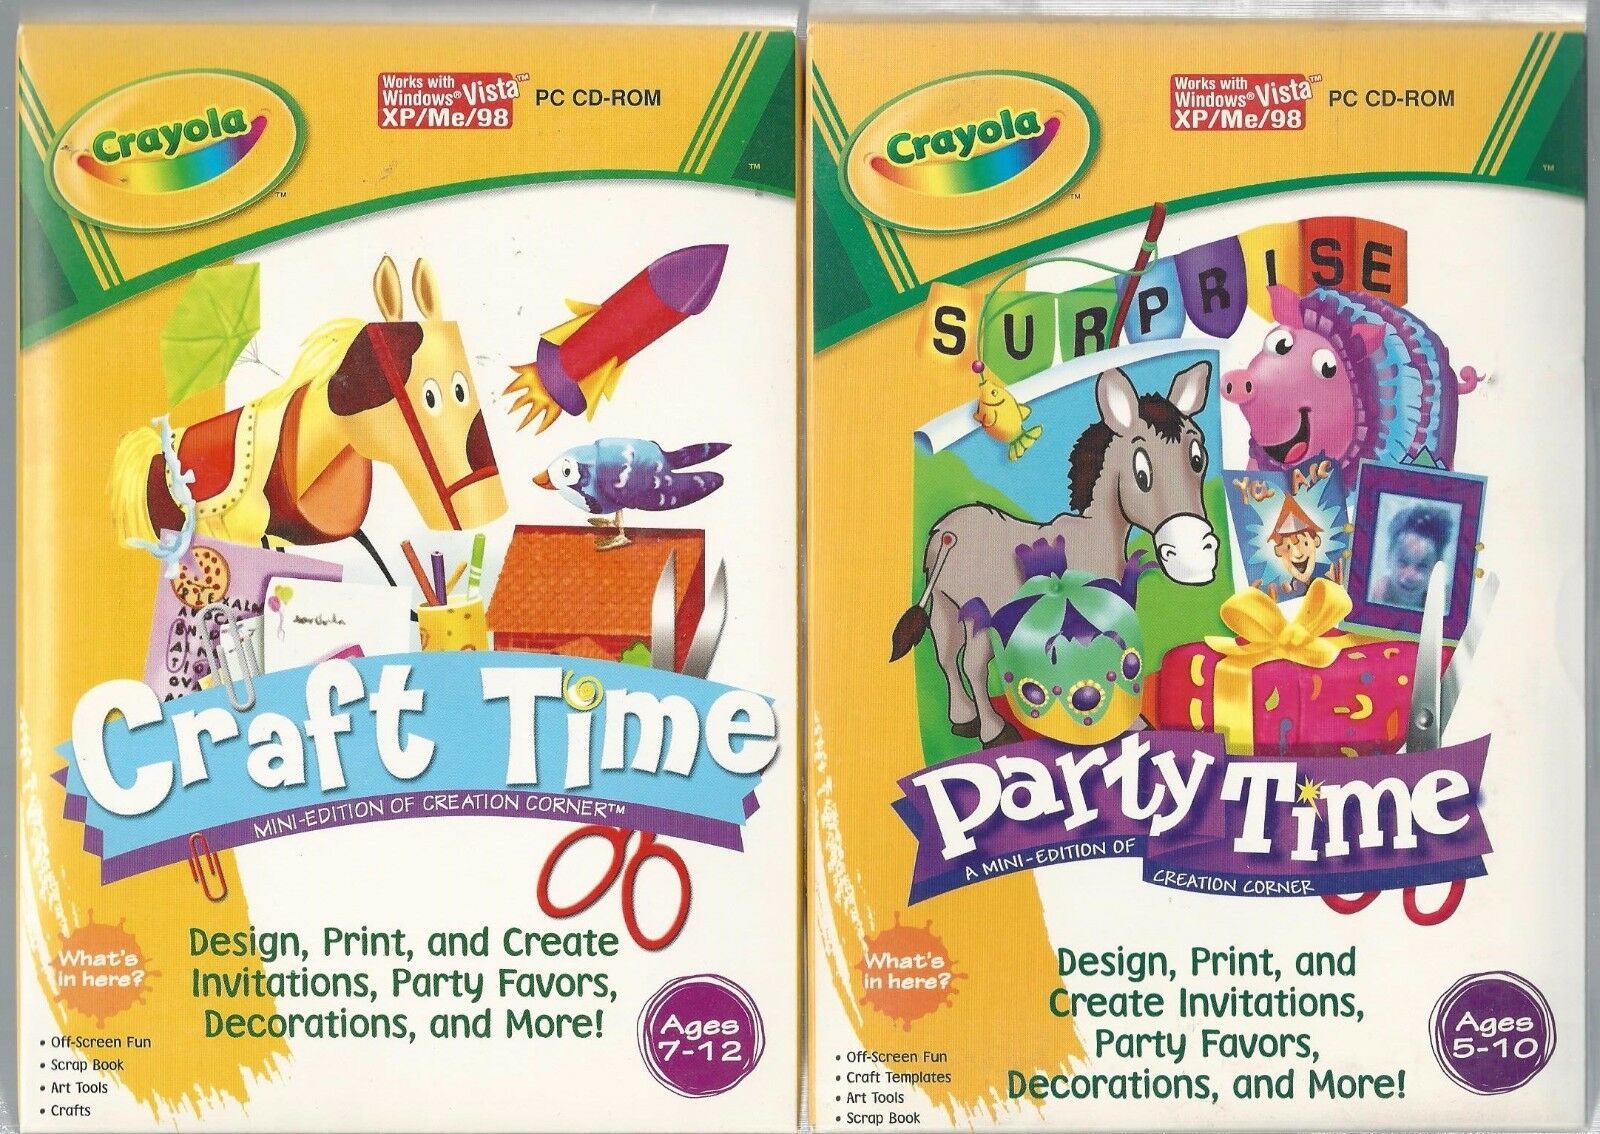 2 Crayola (PC CD-ROM) Craft Time Brand New Party TIme & Craft Time RARE ITEMS - $5.94